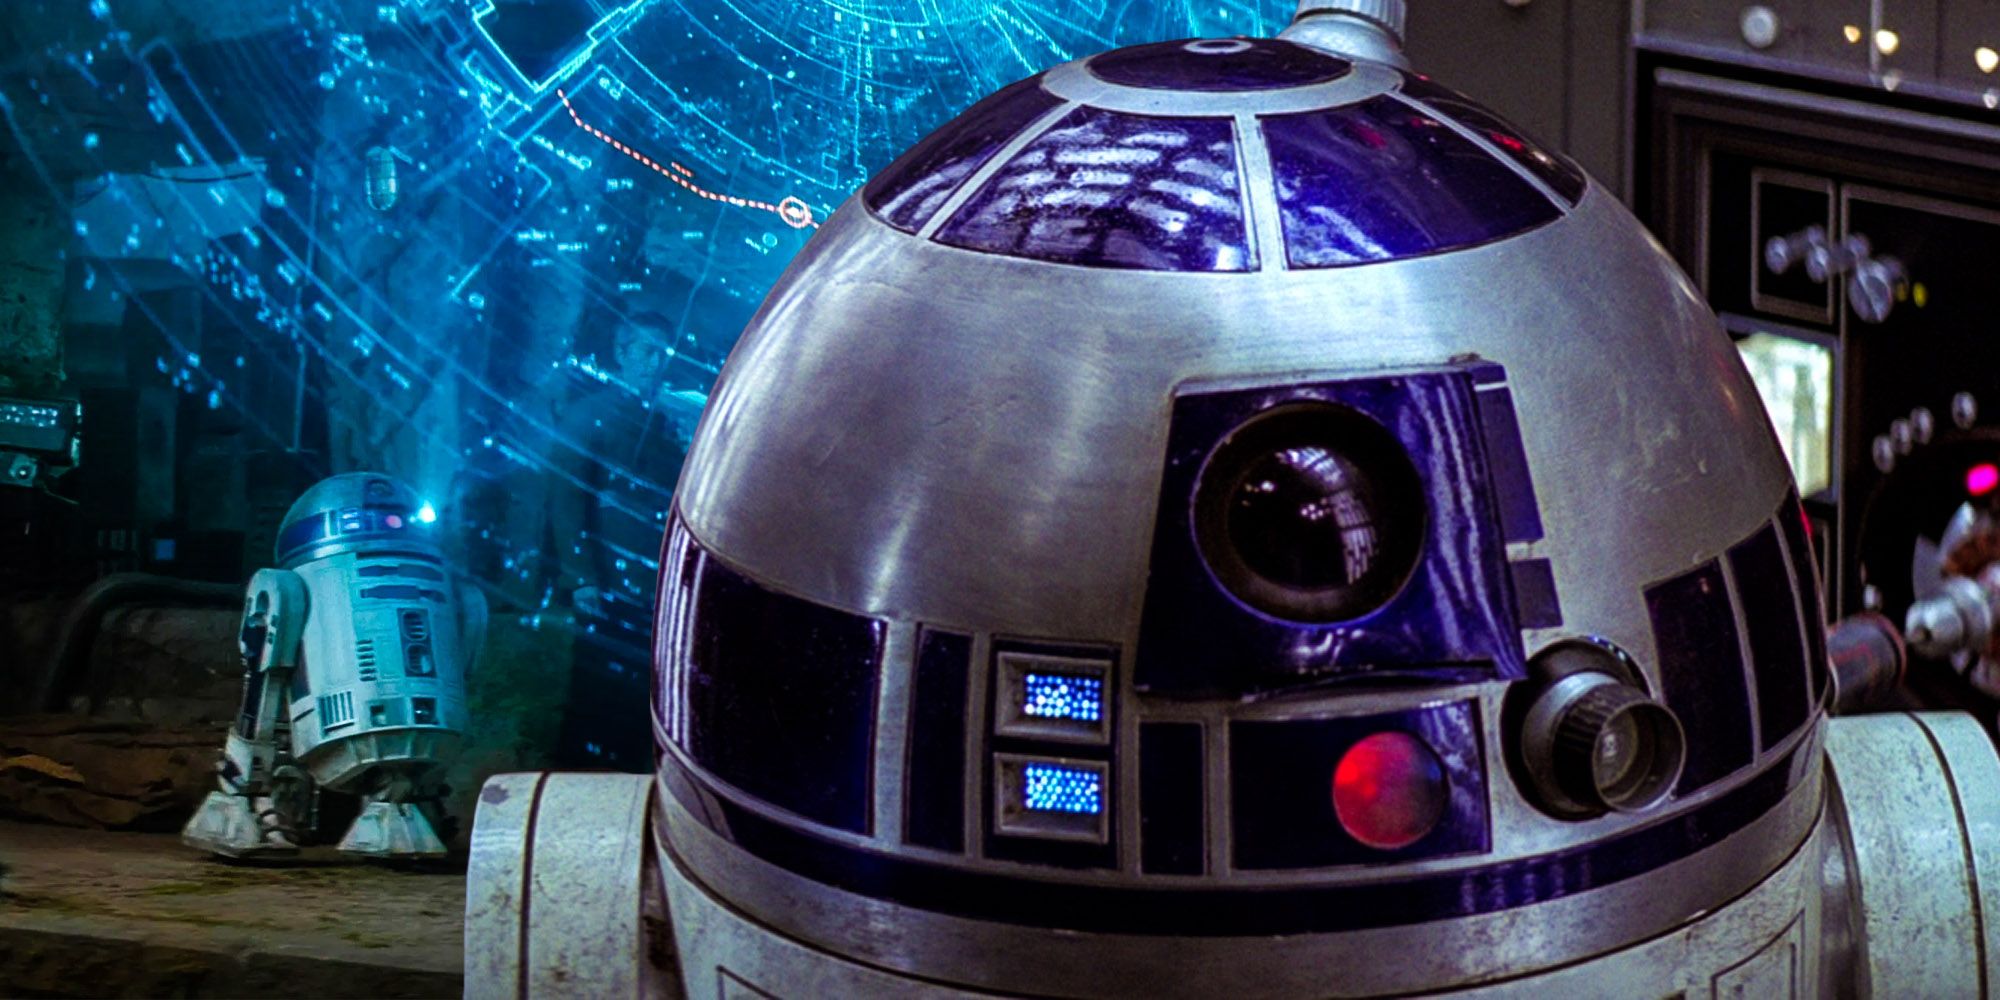 Every Tool And Ability R2D2 Used In Star Wars the force awakens holographic projection